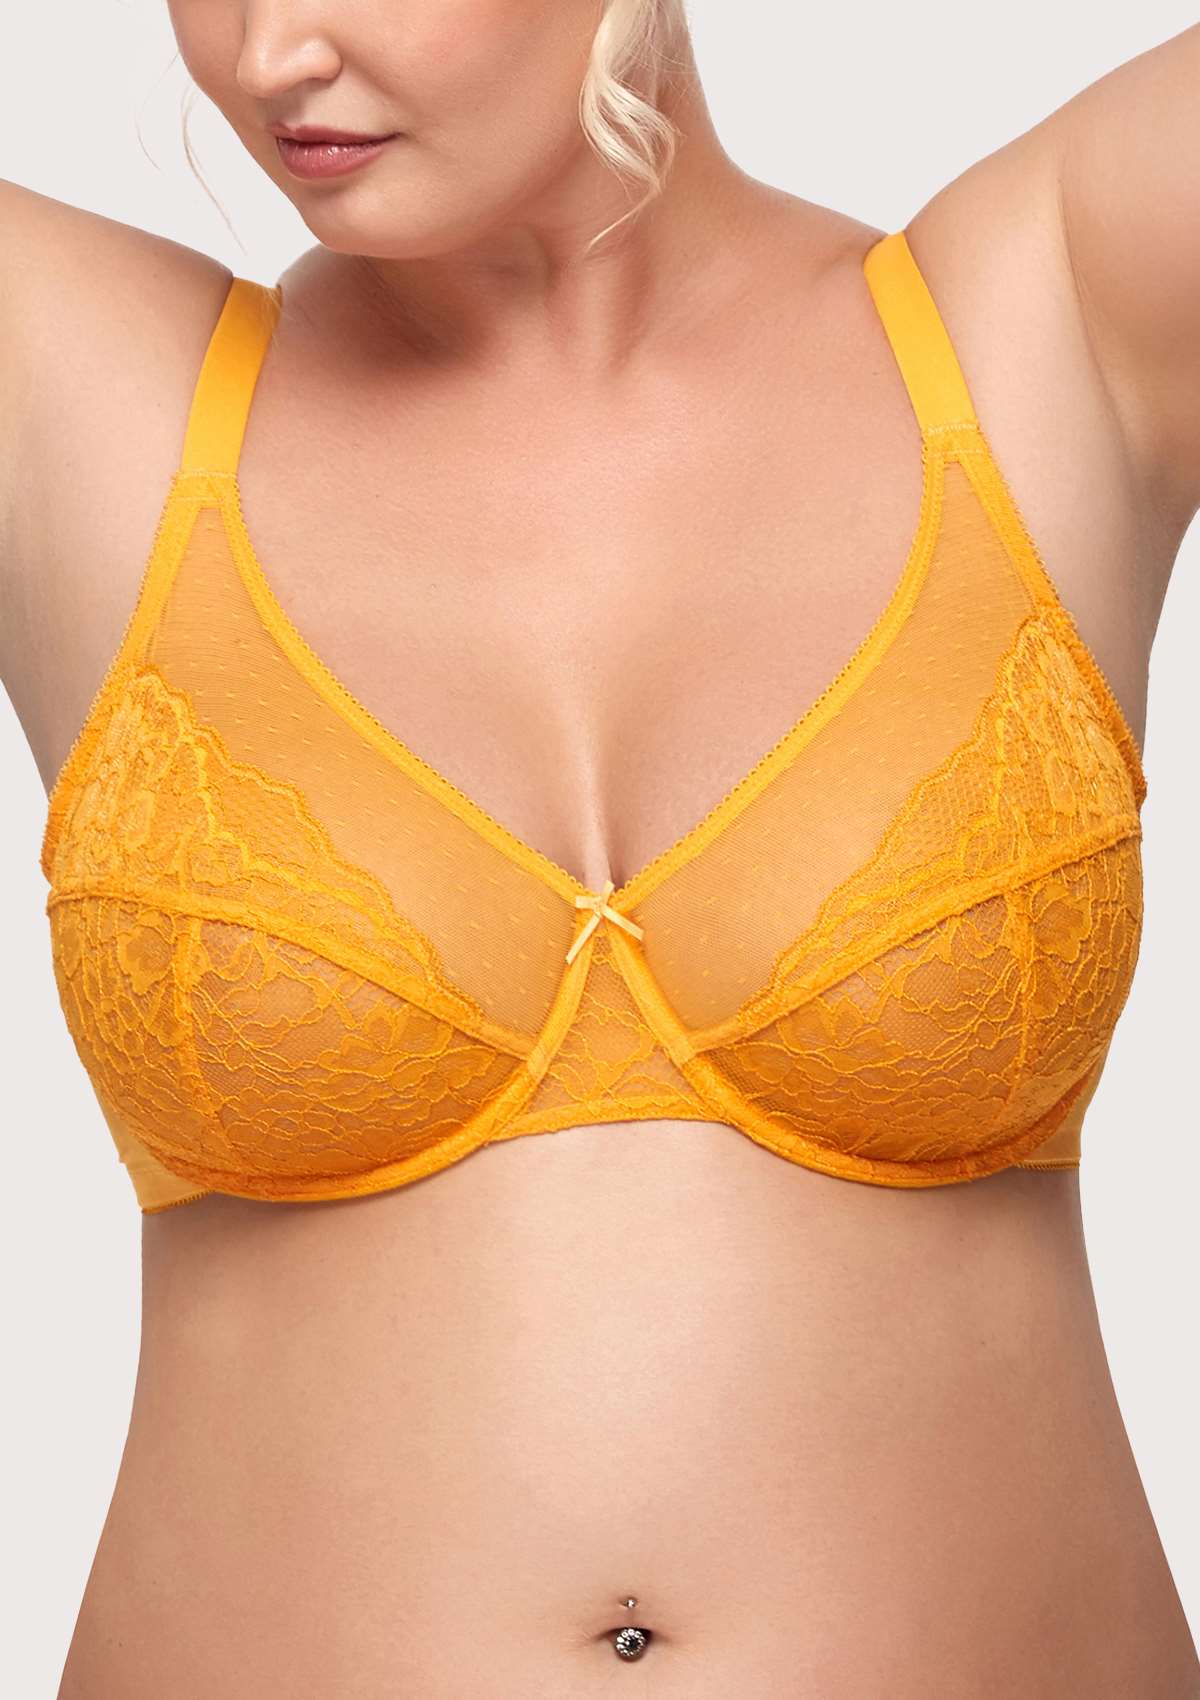 HSIA Enchante Bra And Panty Sets: Unpadded Bra With Back Support - Cadmium Yellow / 36 / H